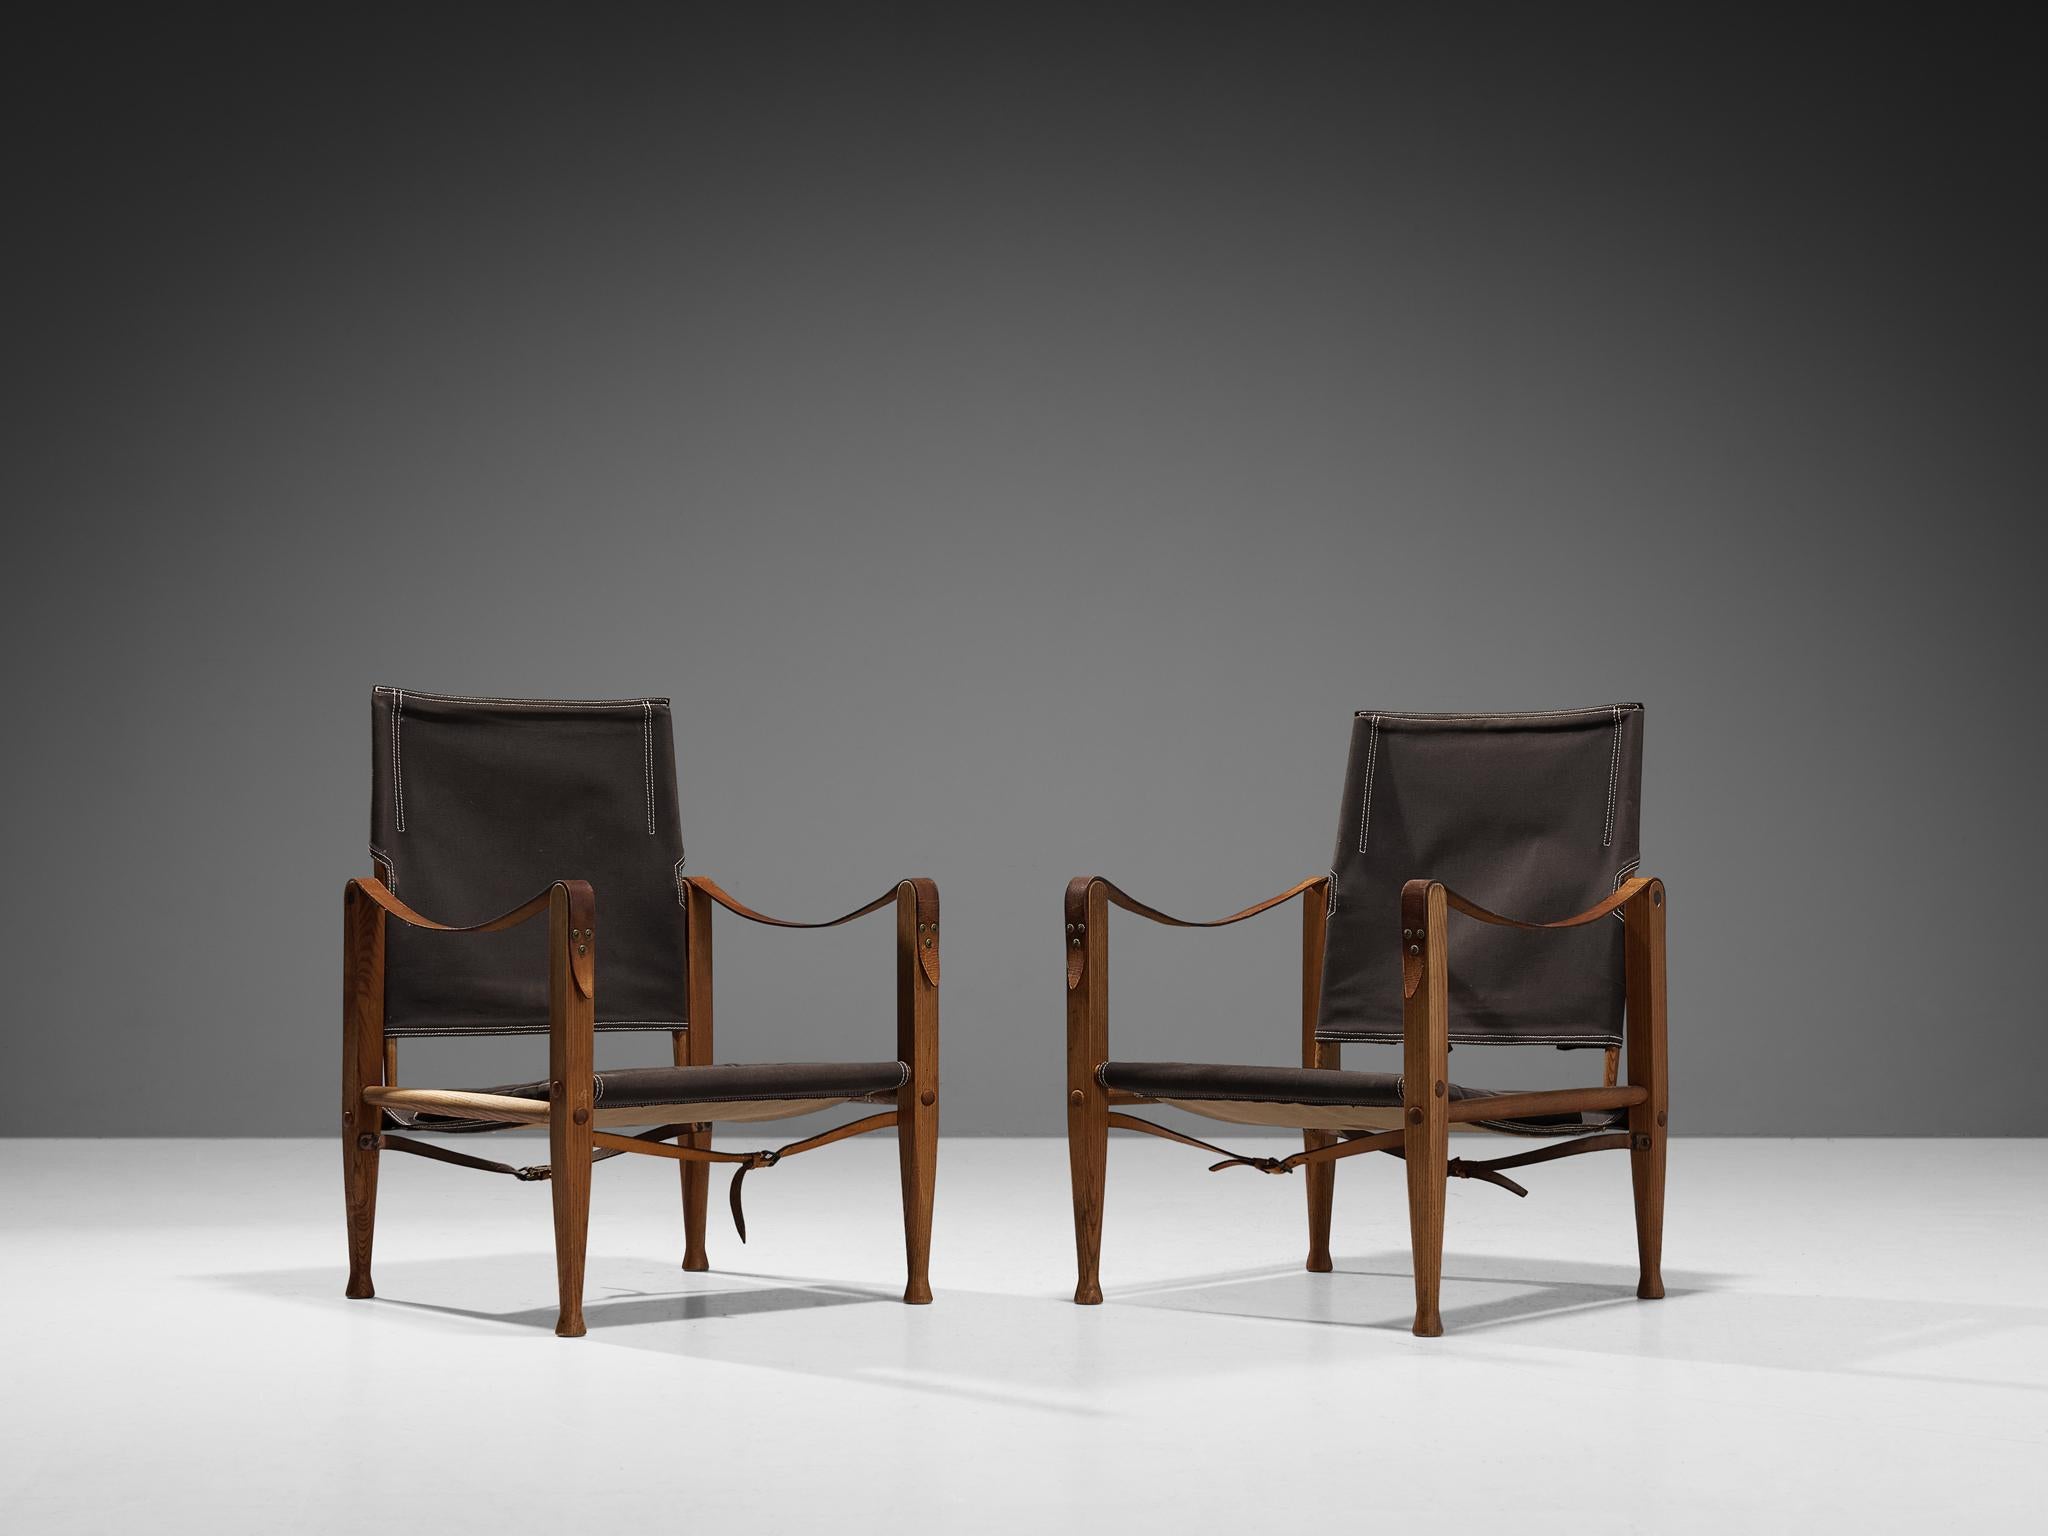 Kaare Klint for Rud Rasmussen, pair of safari chairs model 'KK47000', ash, canvas, metal, brass, leather, Denmark, designed in 1933 and produced in 1960s. 

The chair shows very elegant and well-designed lines, in combination with carefully crafted